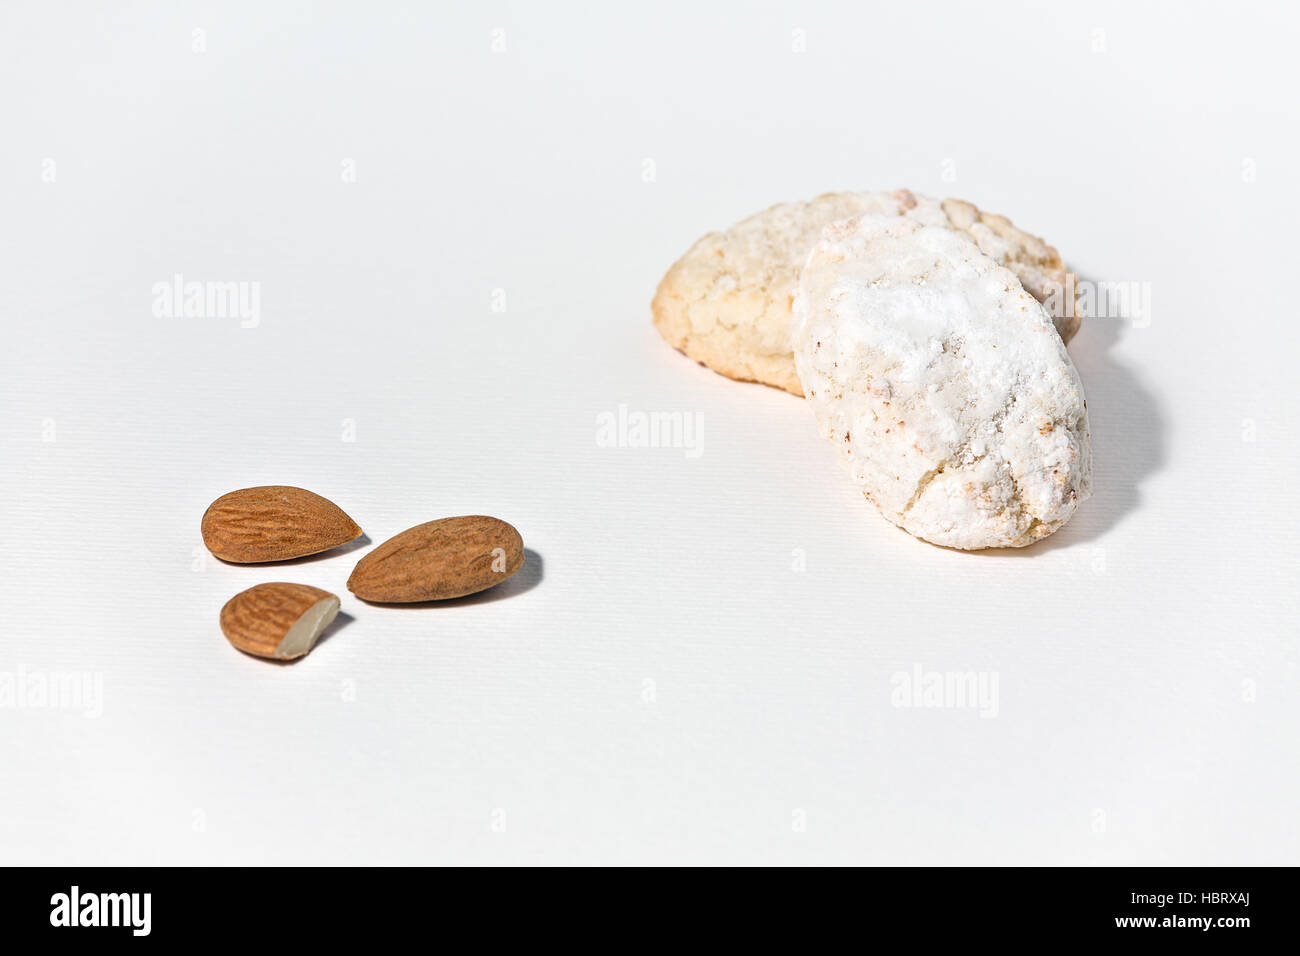 Ricciarelli biscuits of Siena with almonds Stock Photo